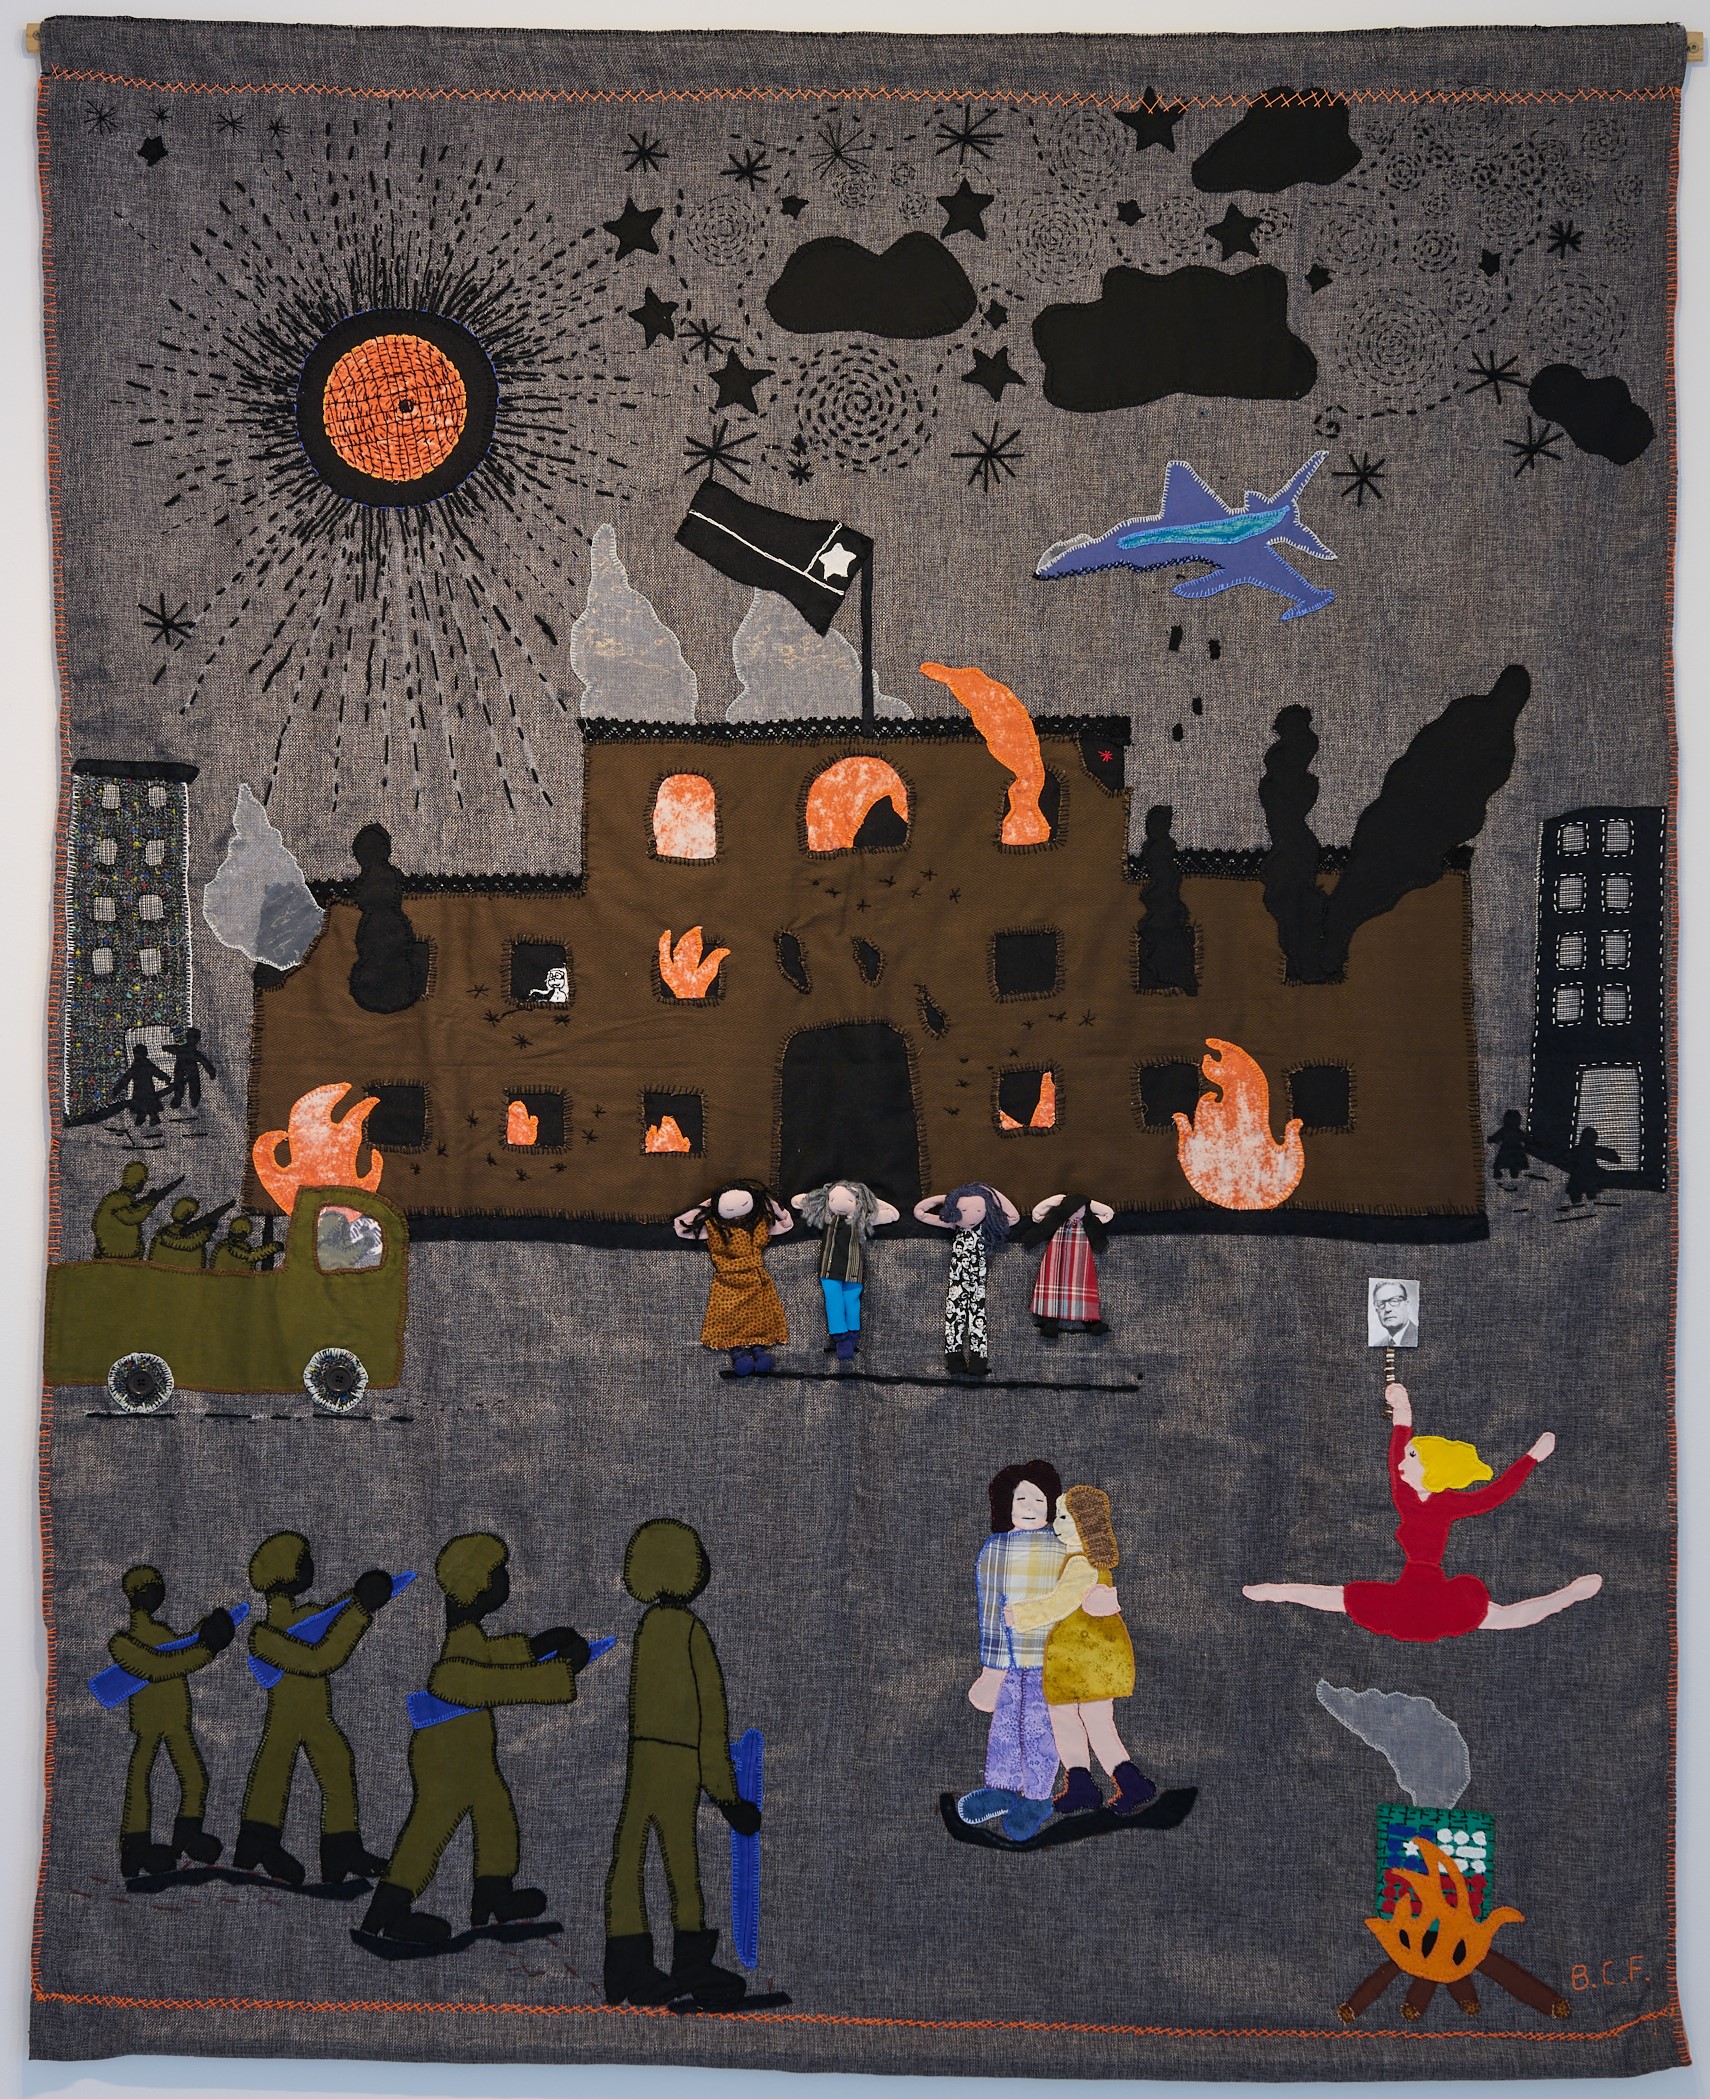 A dark arpillera depicting a violent scene with a burning building, military vehicles, soldiers with guns and women being held at gunpoint.